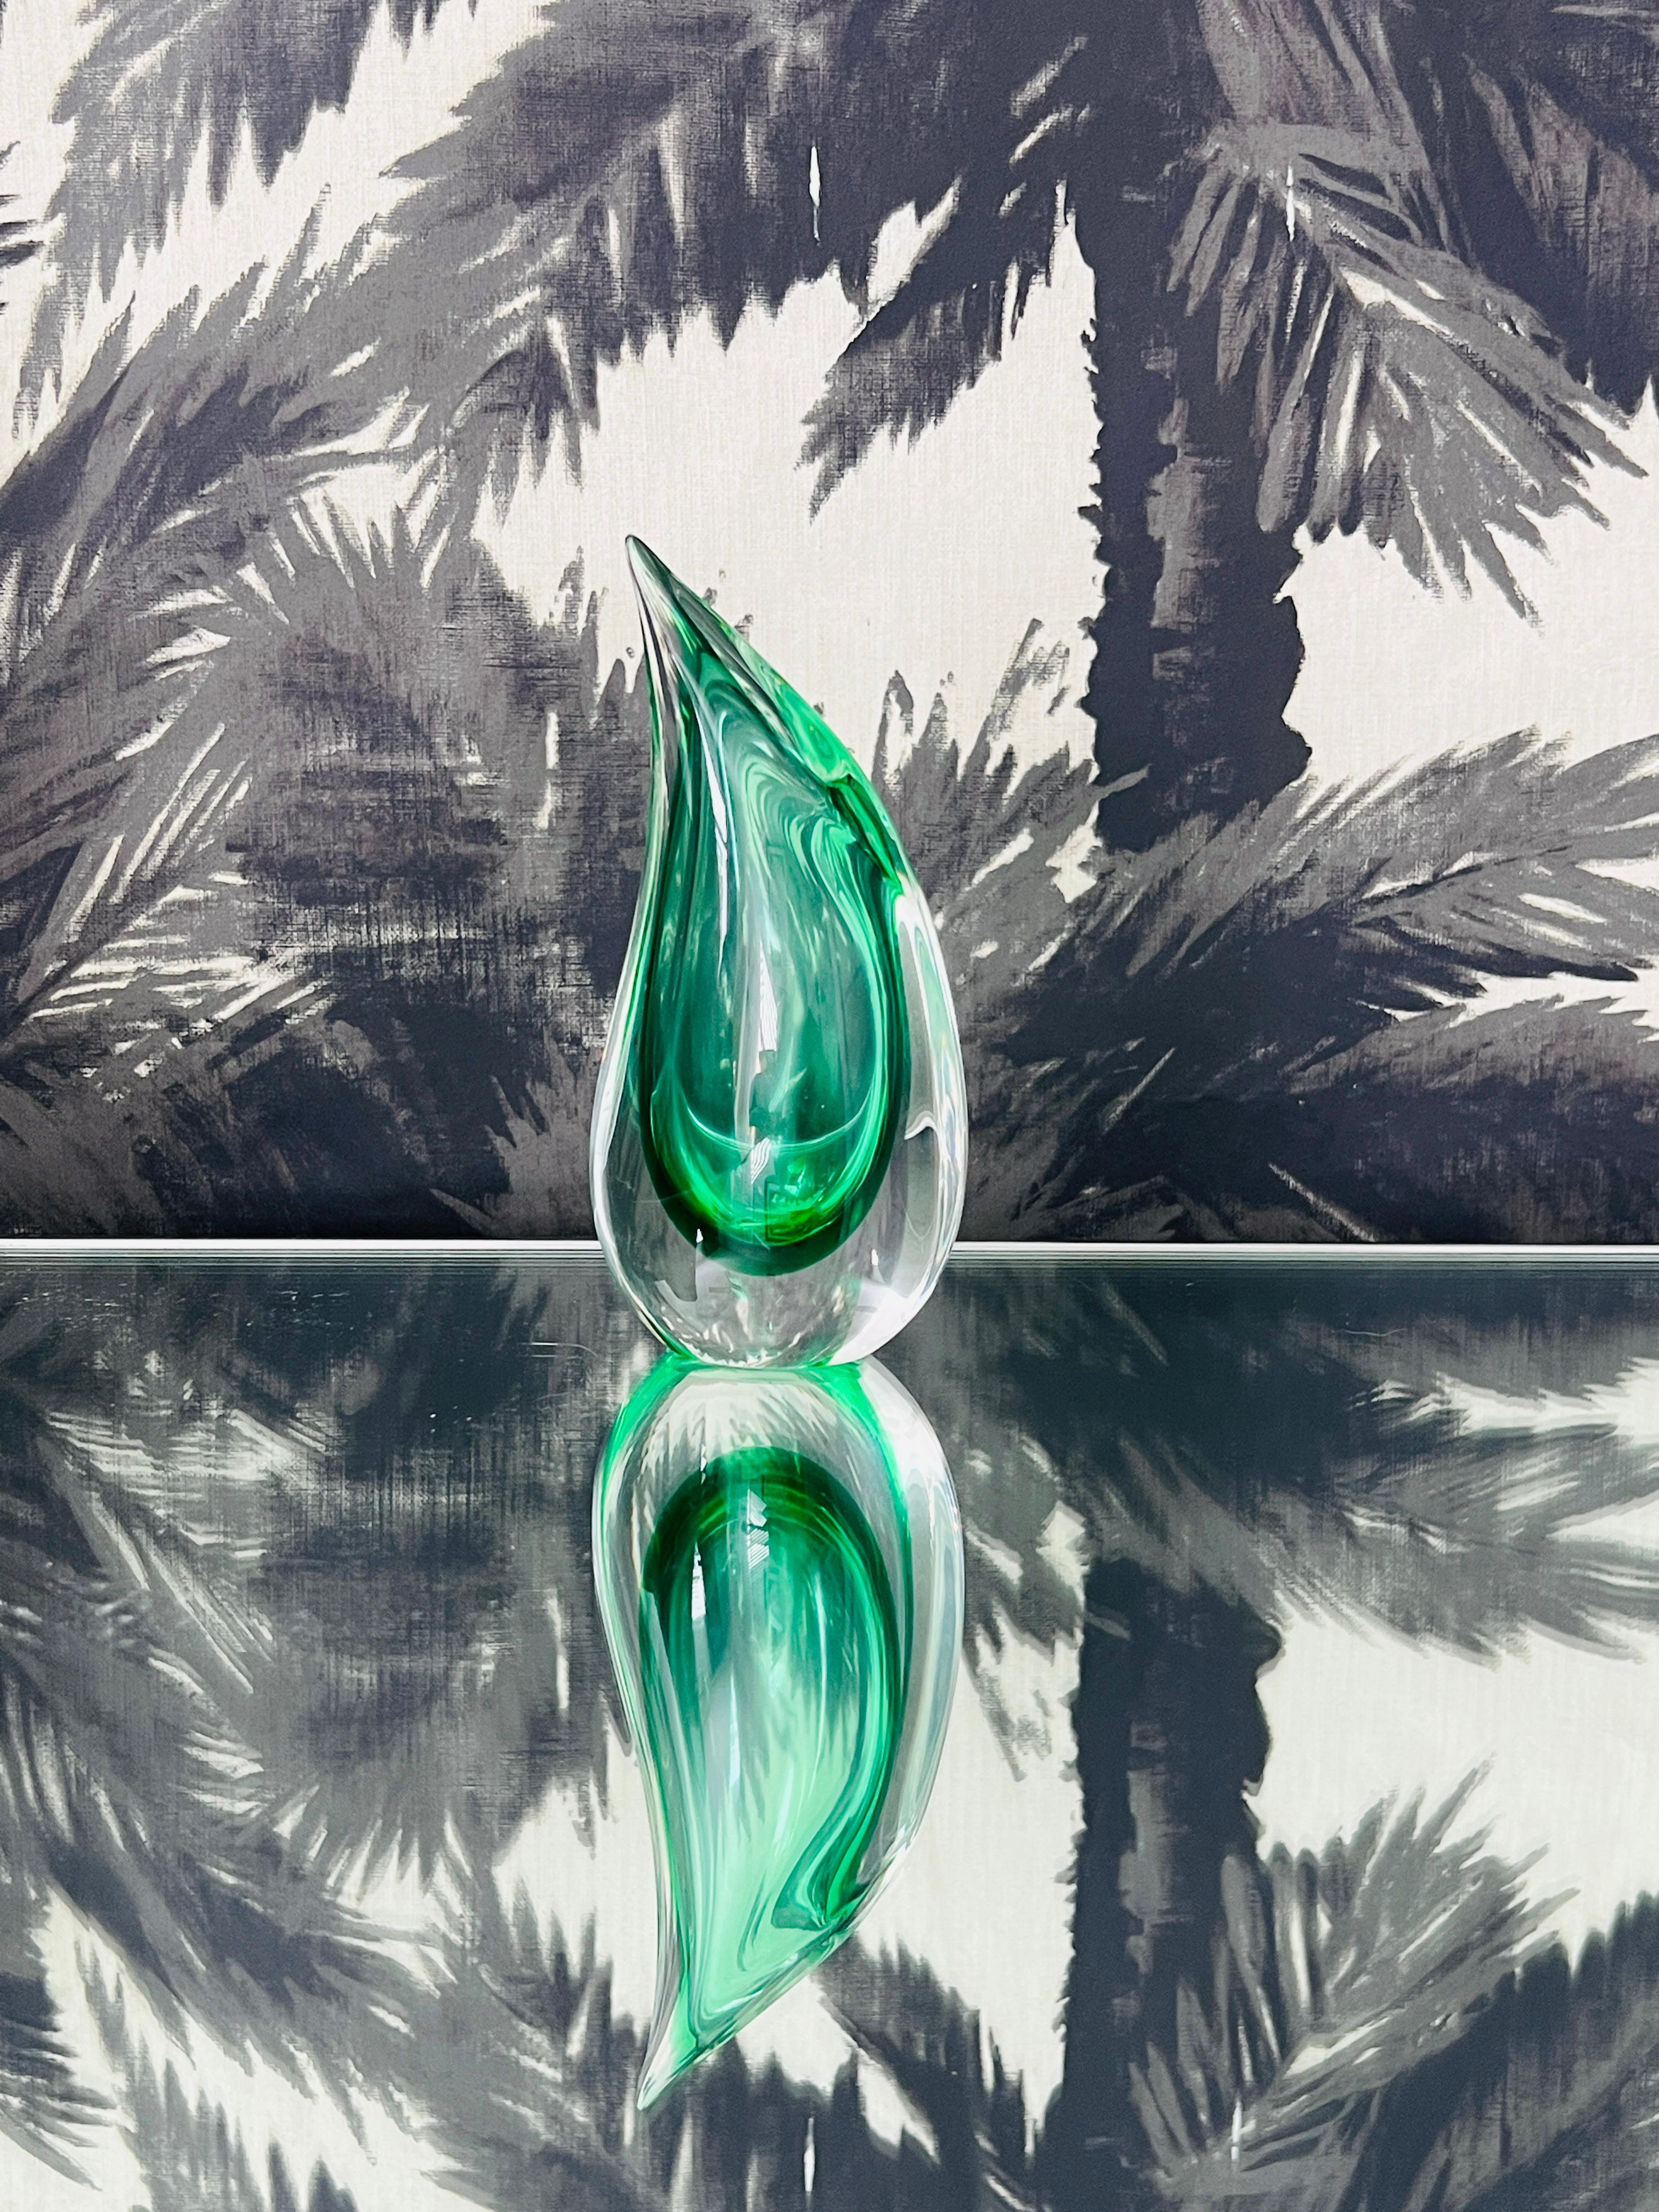 Late 20th Century Green Murano Glass Bud Vase with Flame Tip Design by Luigi Onesto, 1970's Signed